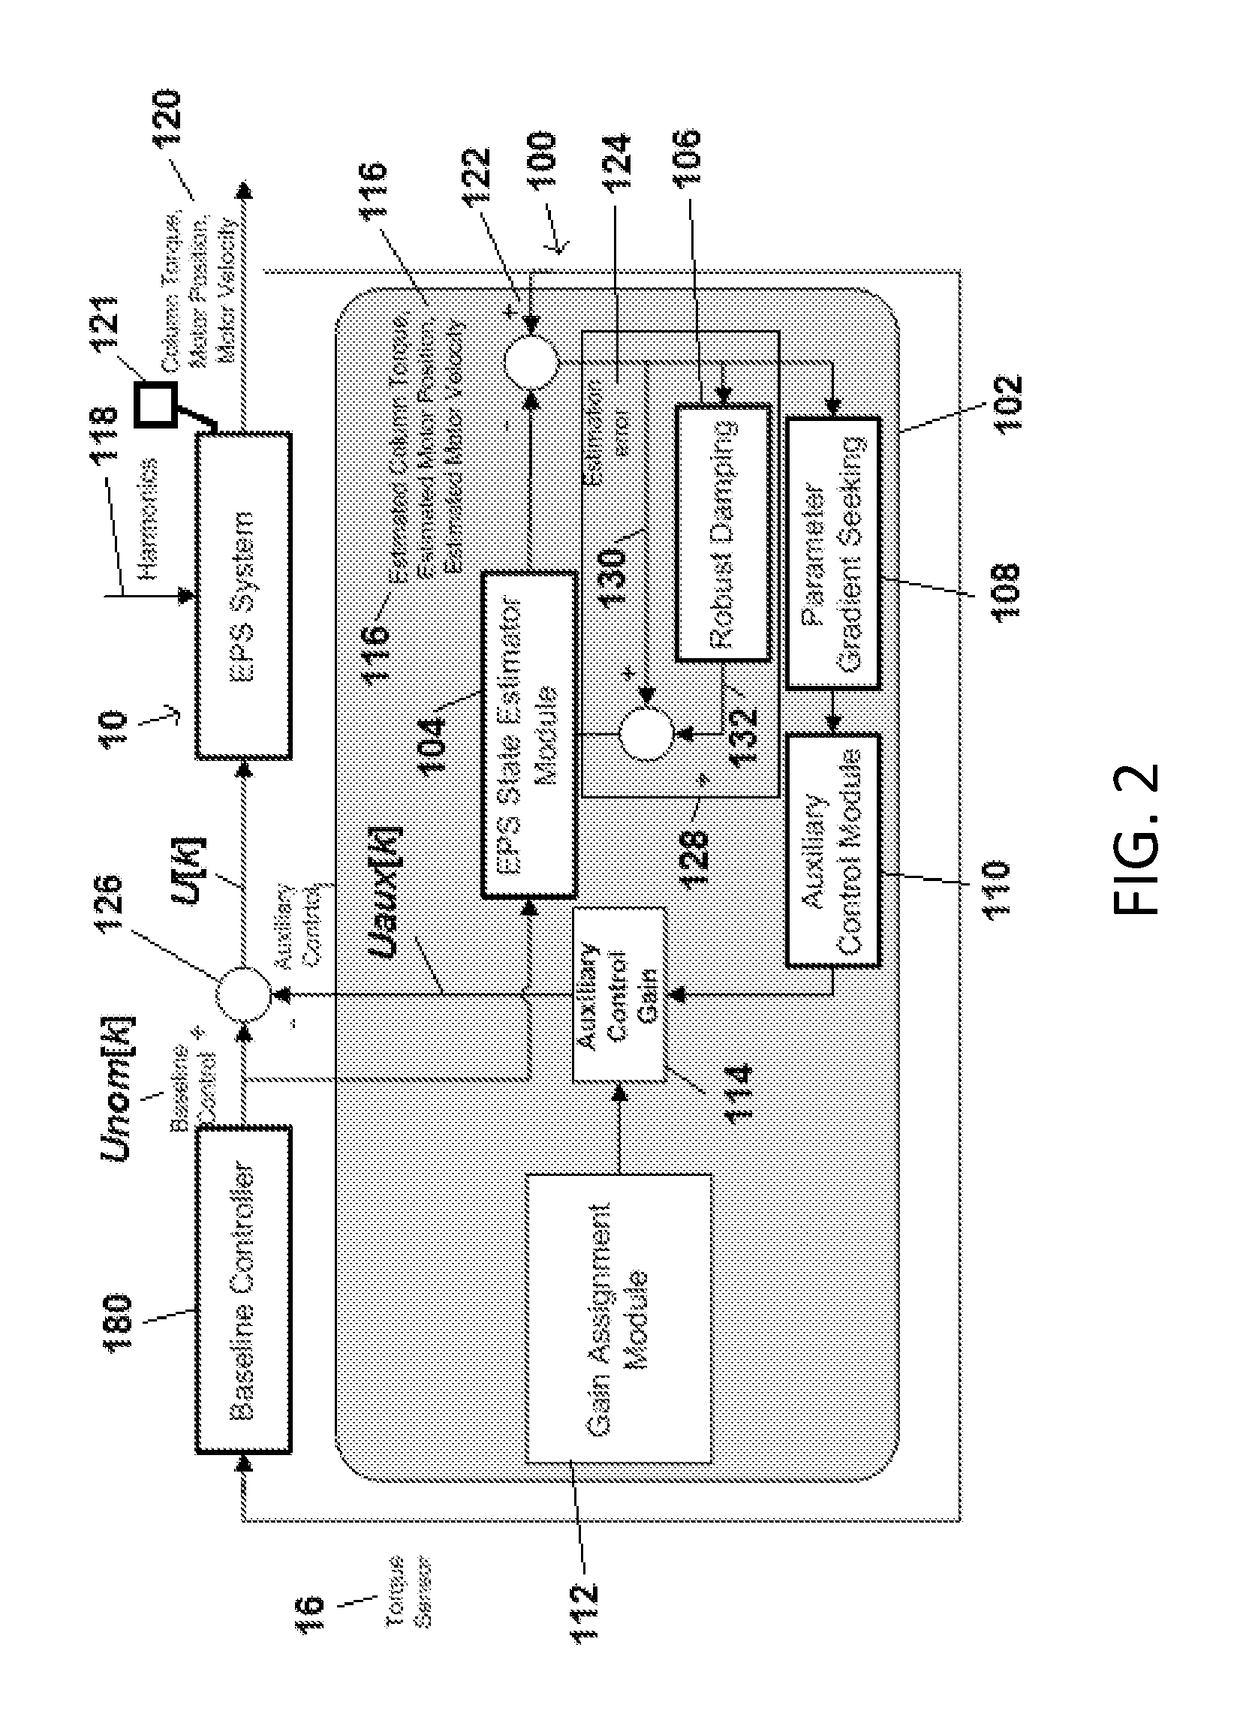 System and method for robust active disturbance rejection in electric power steering